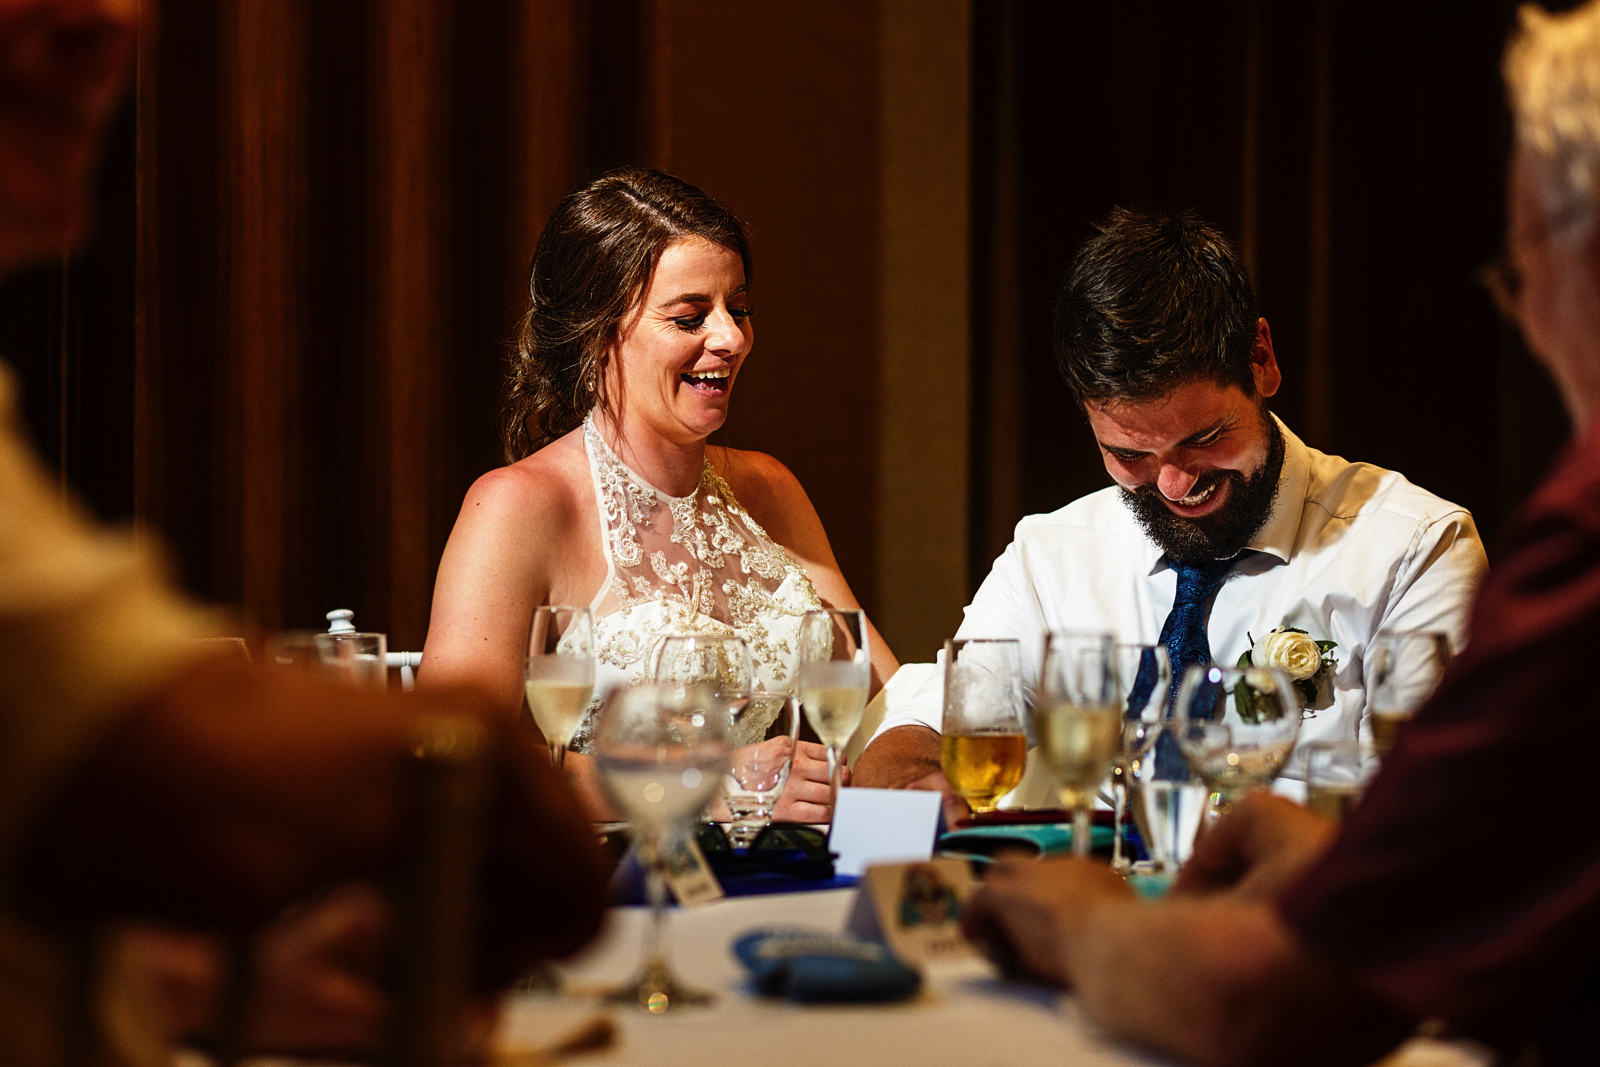 Groom and bride laughing during the speeches at the dinner table.